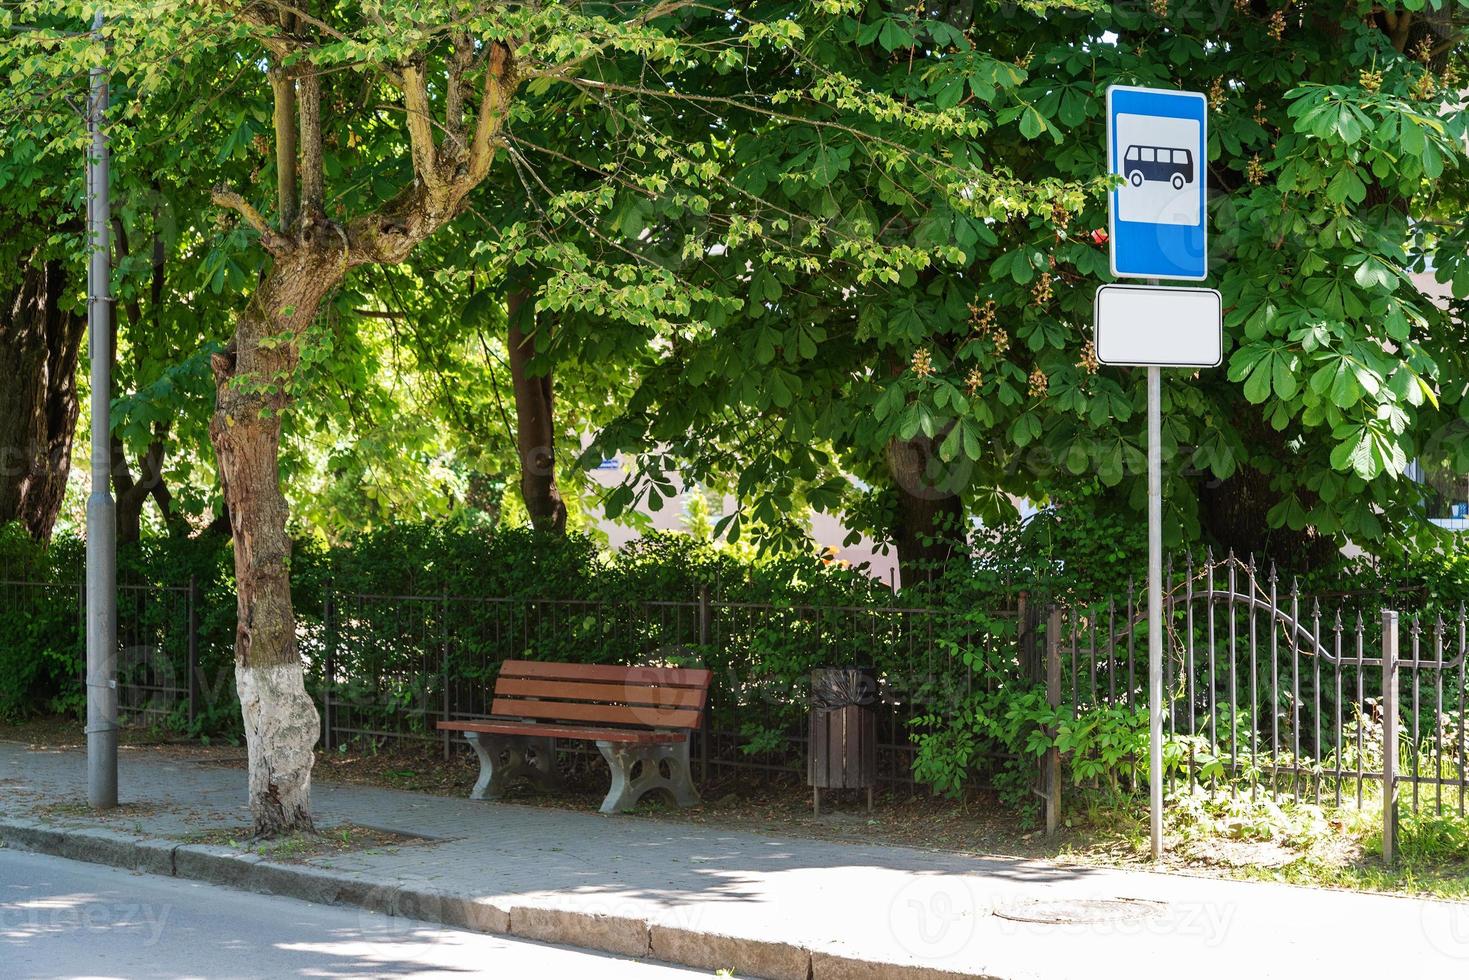 A bench near the bus stop with trees. photo